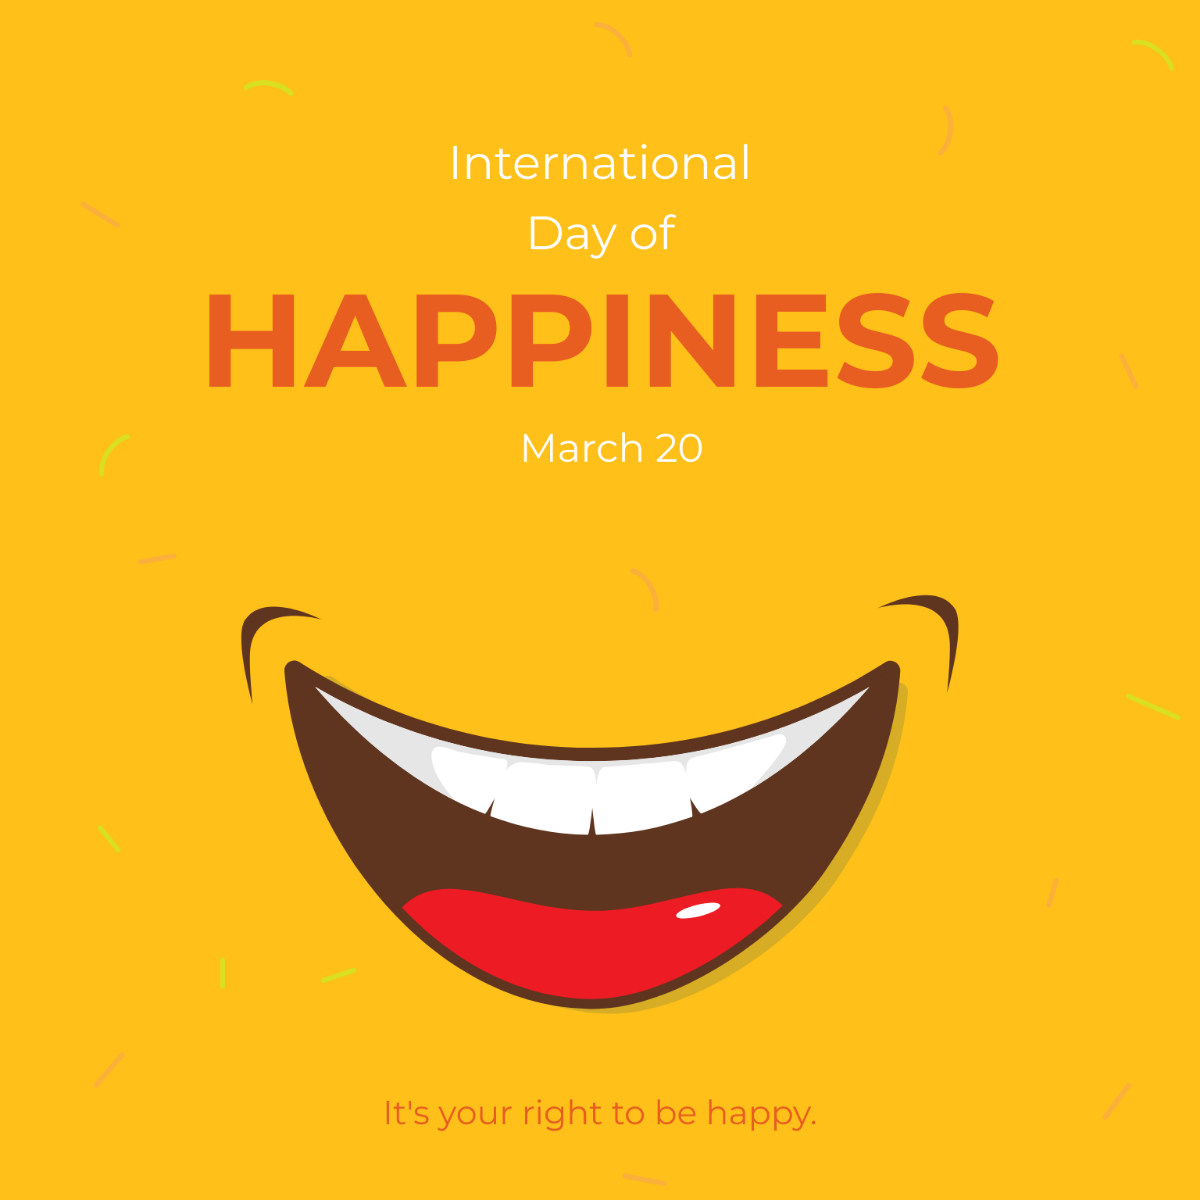 International Day of Happiness Flyer Vector Template